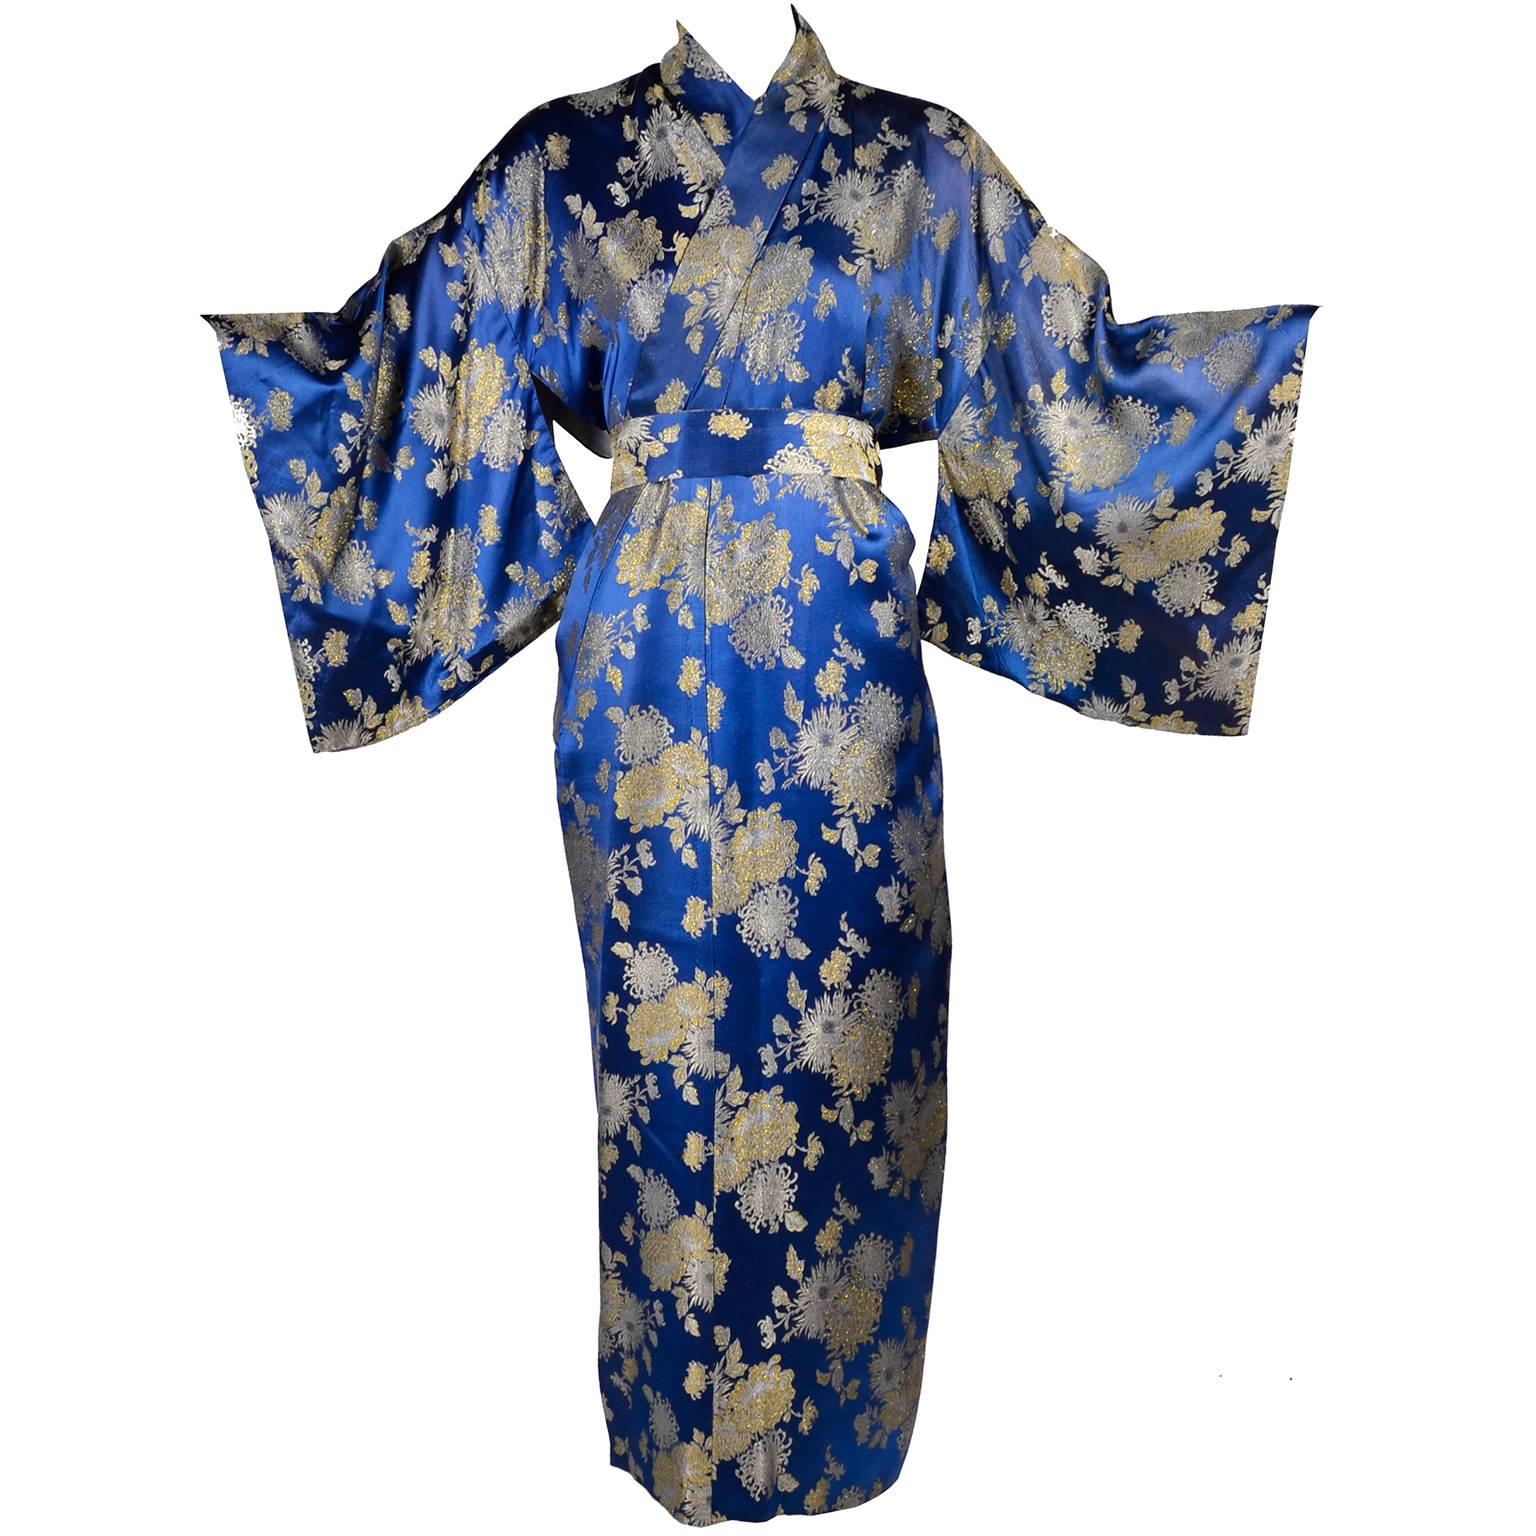 This is a lovely vintage mid century Japanese kimono is a beautiful blue silk fabric with varying shades of gold metallic floral embroidery.  The kimono has a matching fabric sash and is lined in white silk.  There is a label that reads; Best